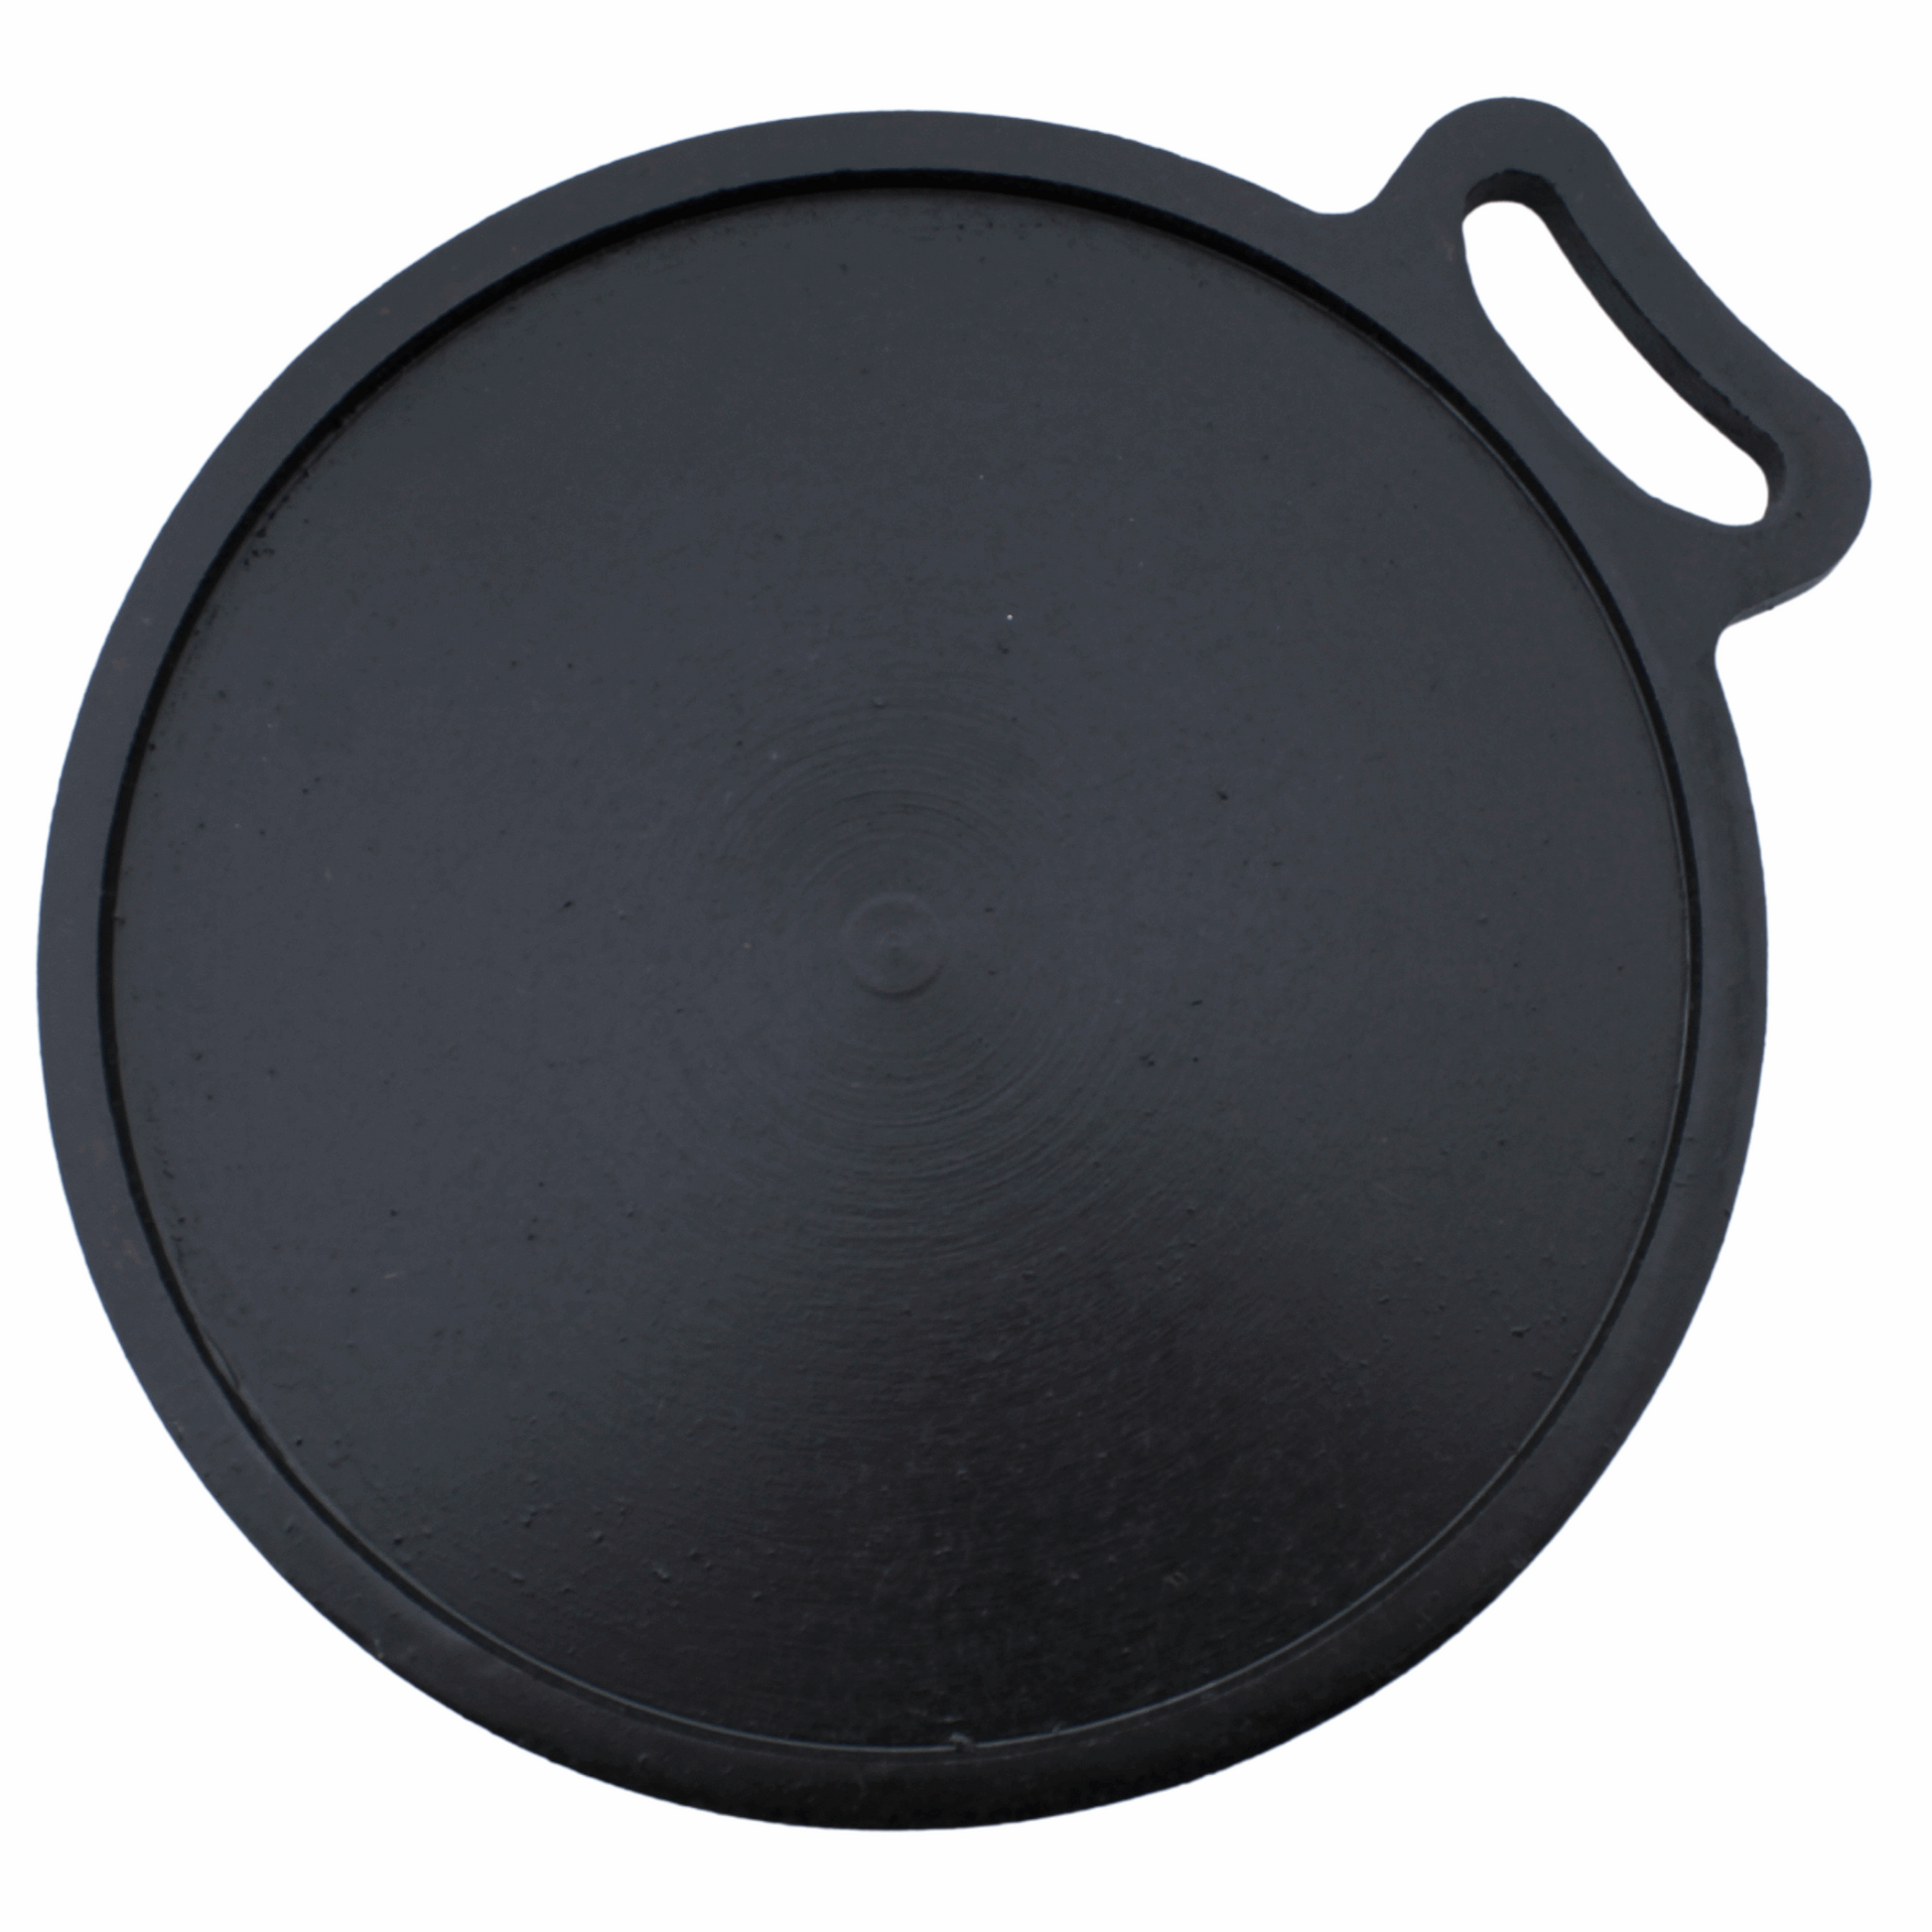 Bestofry Cast Iron Dosa Tawa 12 Inches / 30 cm, Double handle dosa pan (2.5  kgs)